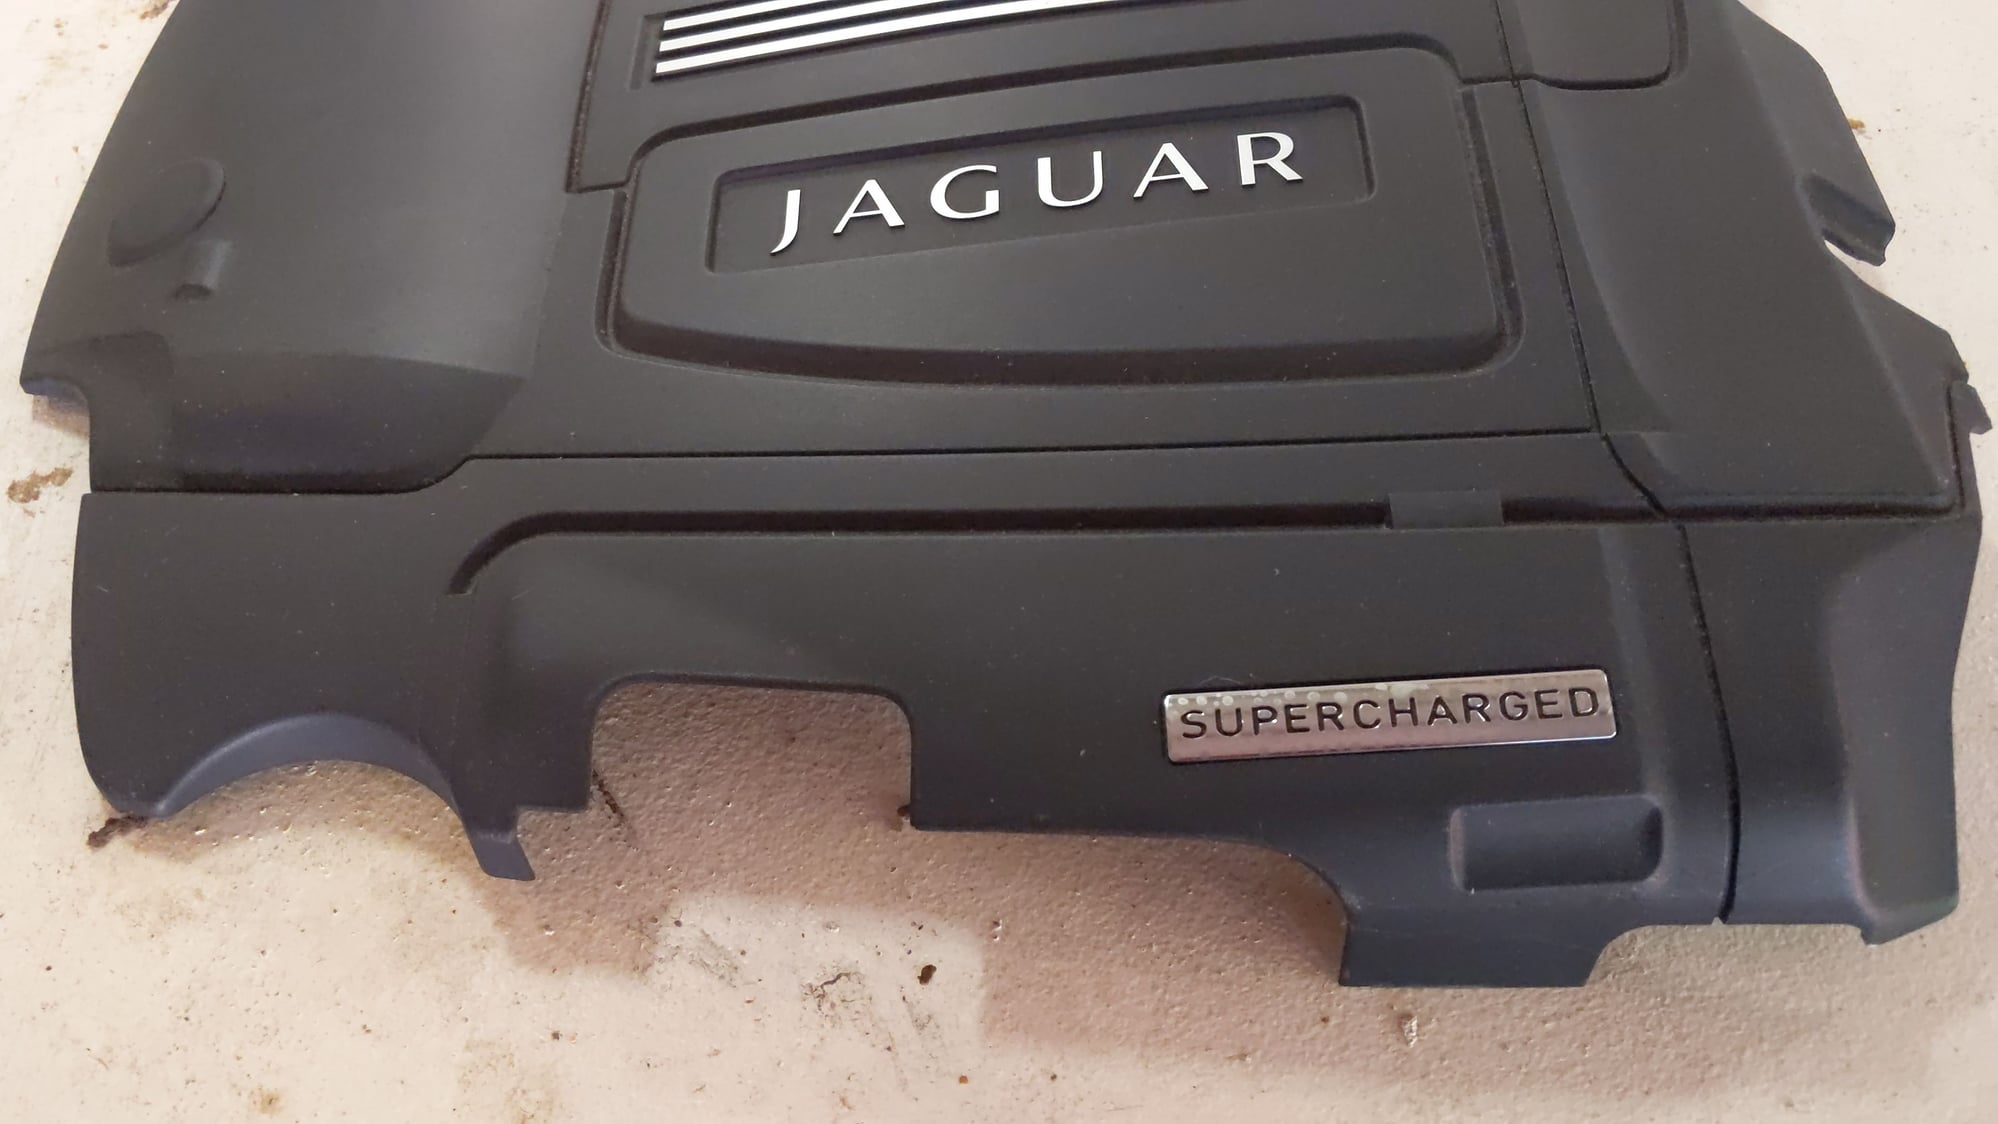 Miscellaneous - Jaguar XFR (X250) "Supercharged" Engine Cover - Used - 2007 to 2015 Jaguar XFR - Houston, TX 77002, United States